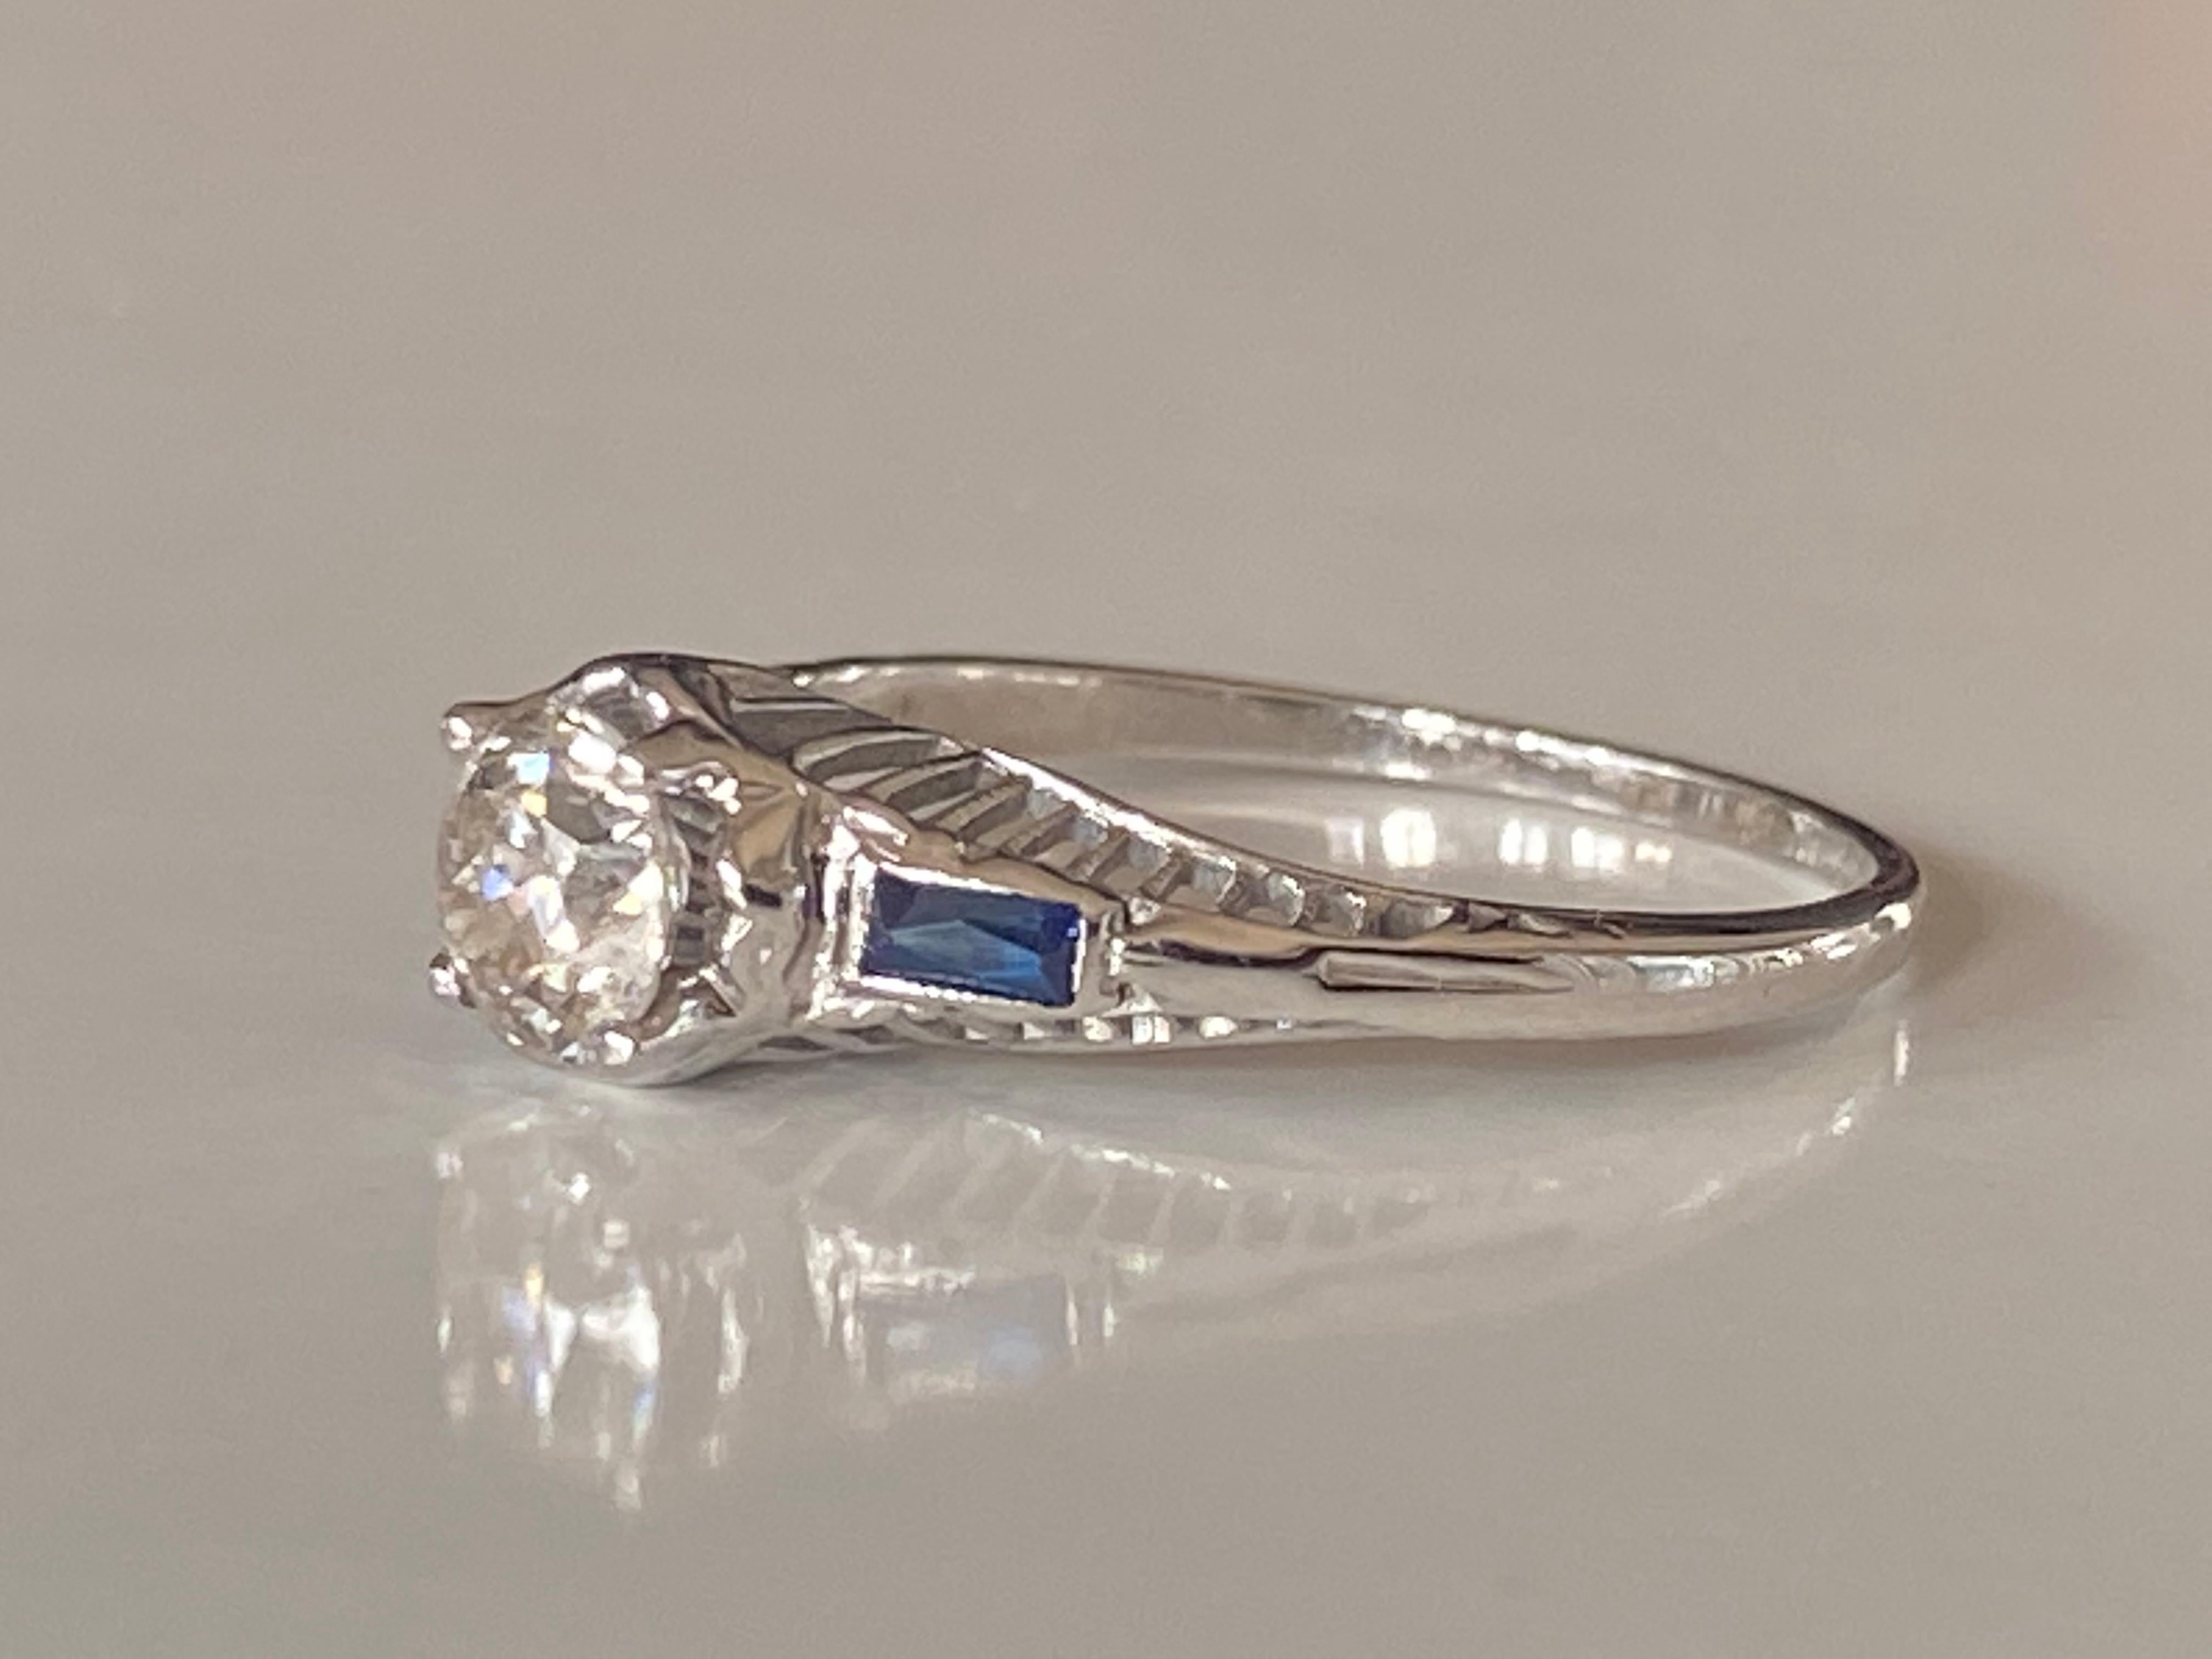 This antique Art Deco ring crafted in the 1920s features an Old European cut diamond center stone measuring approximately 0.65 carats, J color, SI1 clarity, complemented by two baguette blue sapphire side stones set in an 18kt white gold filigree